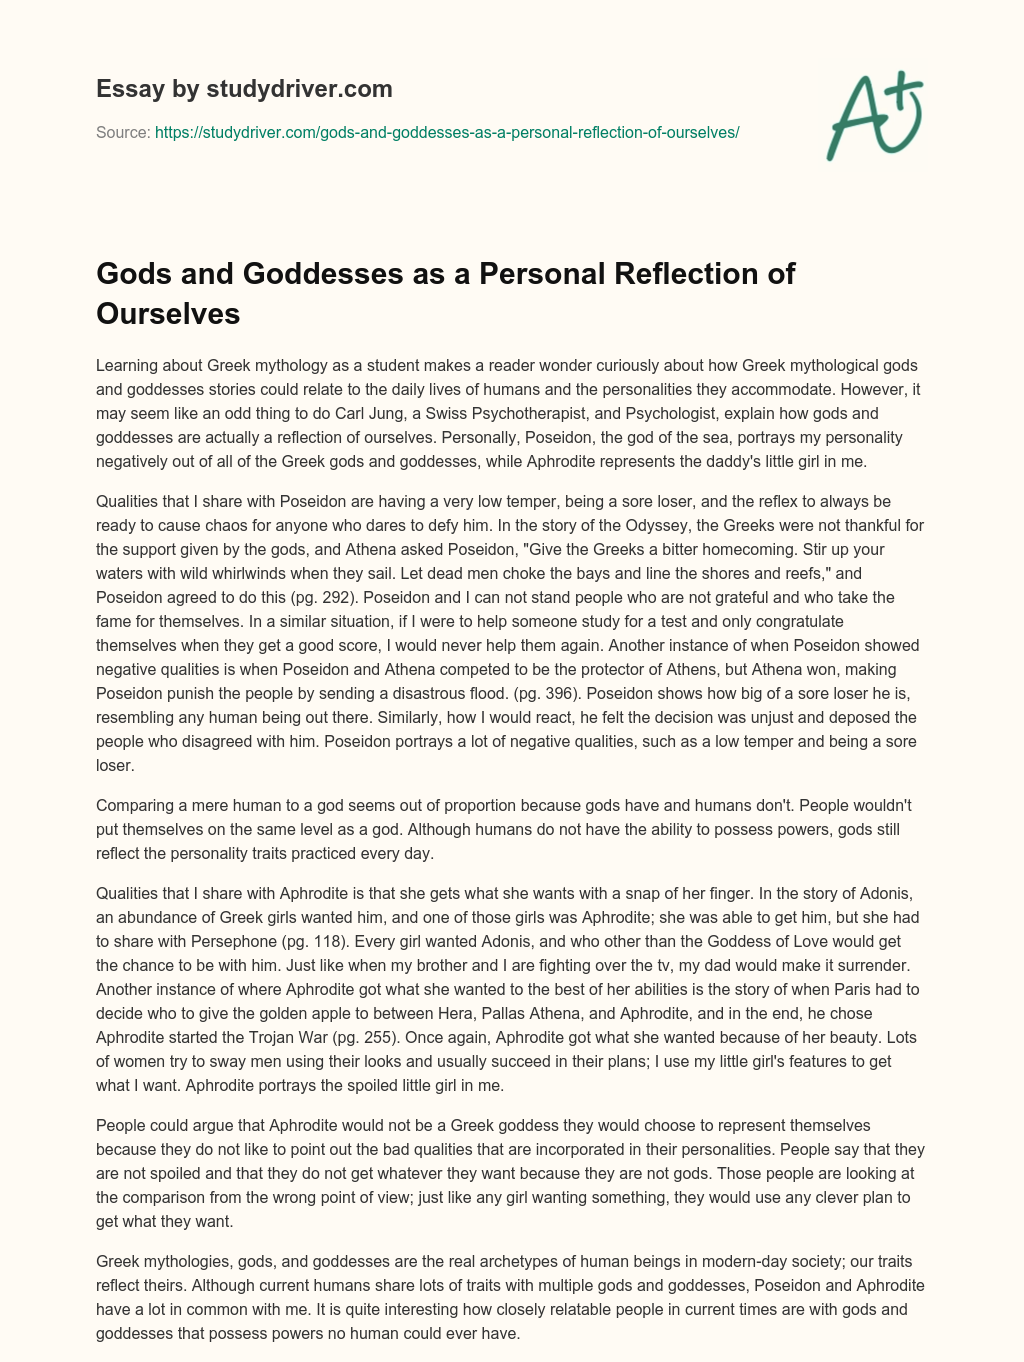 Gods and Goddesses as a Personal Reflection of Ourselves essay